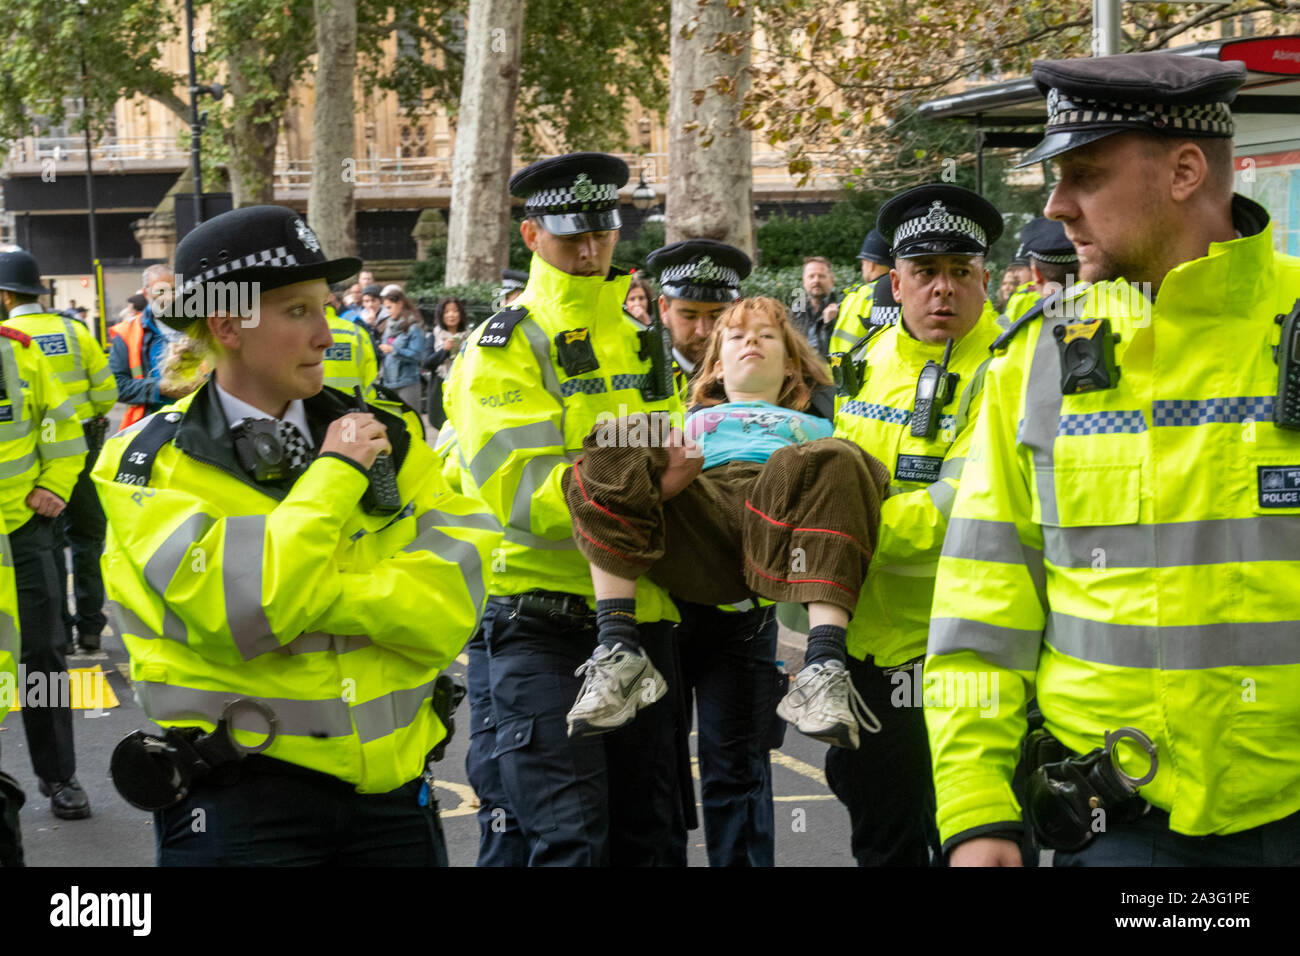 London UK 8th Oct. 2019 Extinction Rebellion  protest outside the Palace of Westminster An arrest of a Extinct Rebellion protester by the police Credit Ian DavidsonAlamy Live News Stock Photo